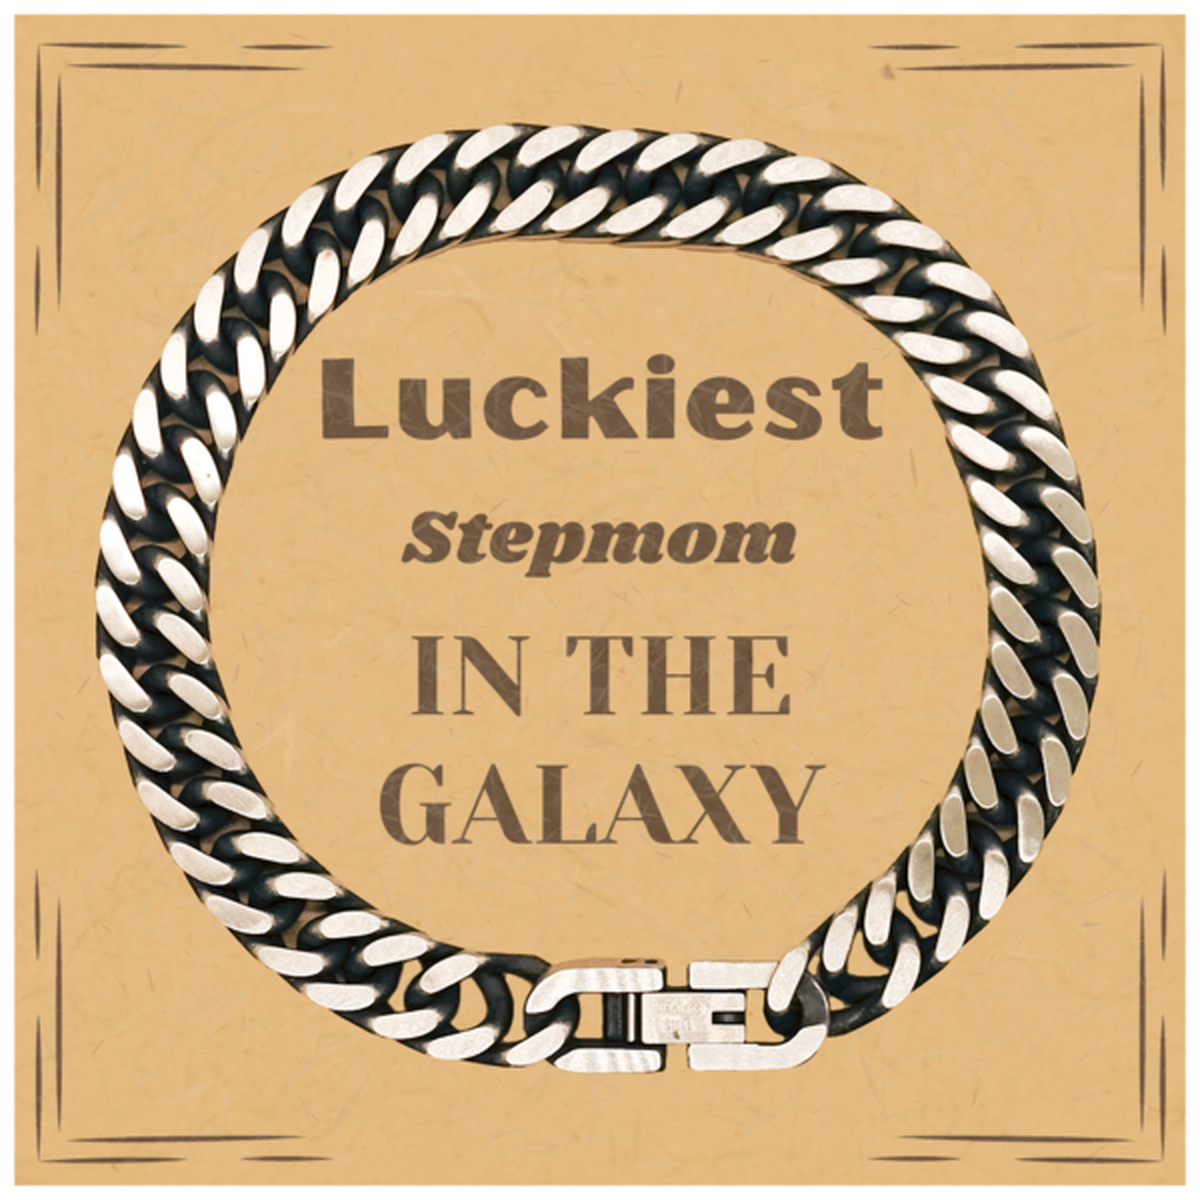 Luckiest Stepmom in the Galaxy, To My Stepmom Message Card Gifts, Christmas Stepmom Cuban Link Chain Bracelet Gifts, X-mas Birthday Unique Gifts For Stepmom Men Women